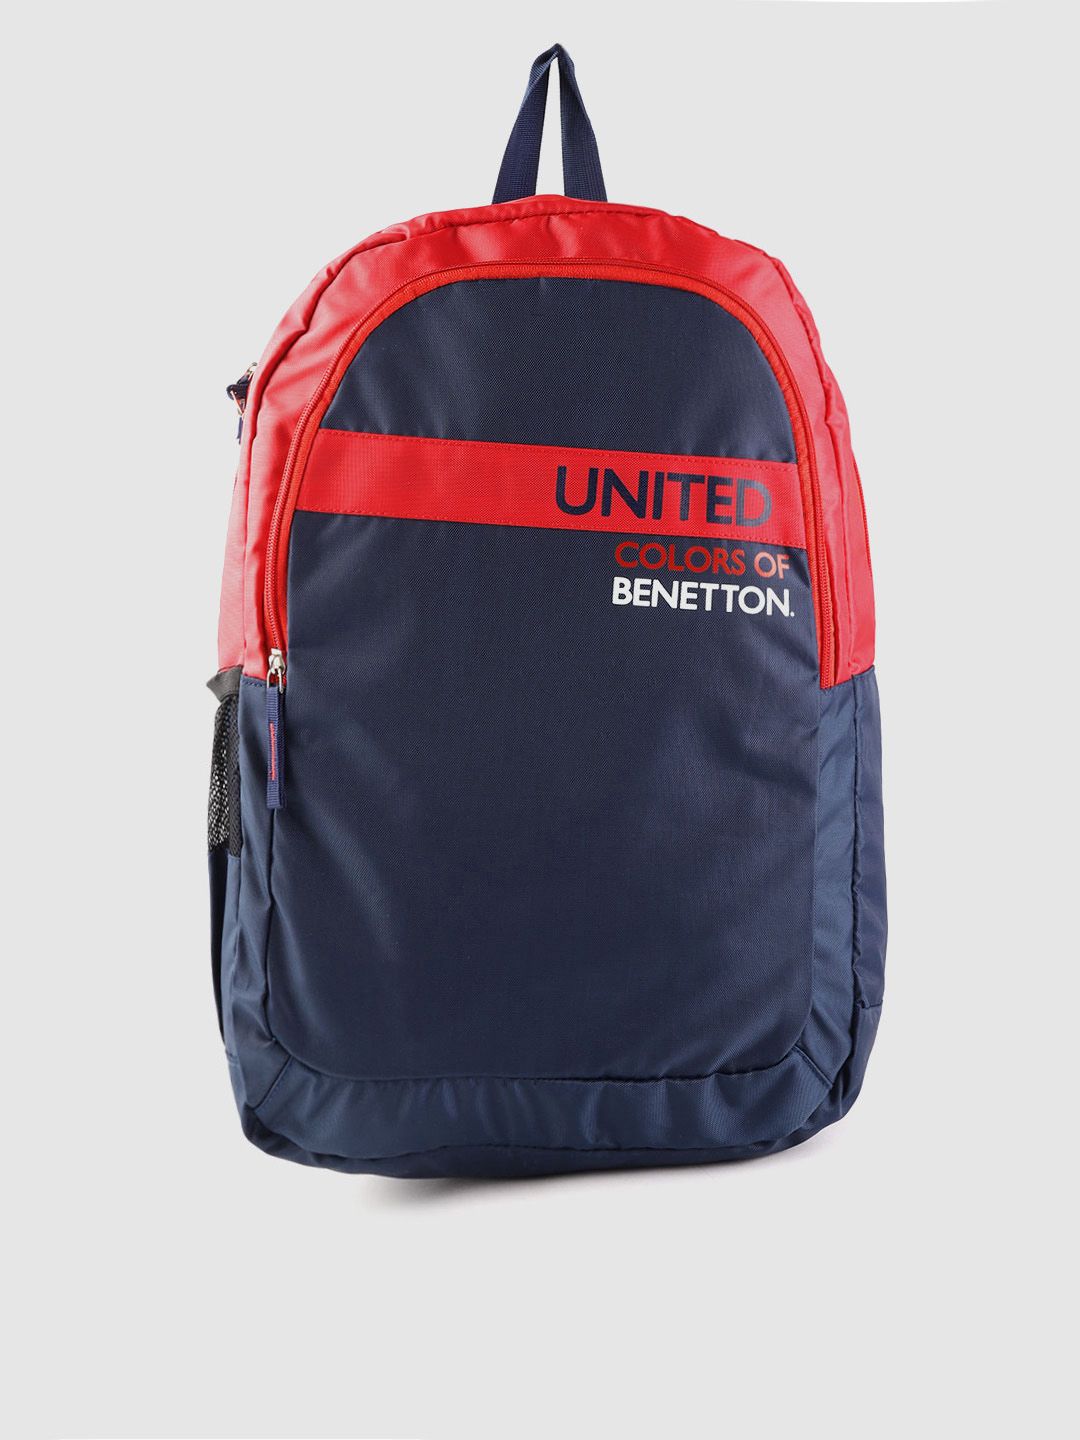 United Colors of Benetton Unisex Navy Blue & Red Solid Laptop Backpack with Printed Detail Price in India